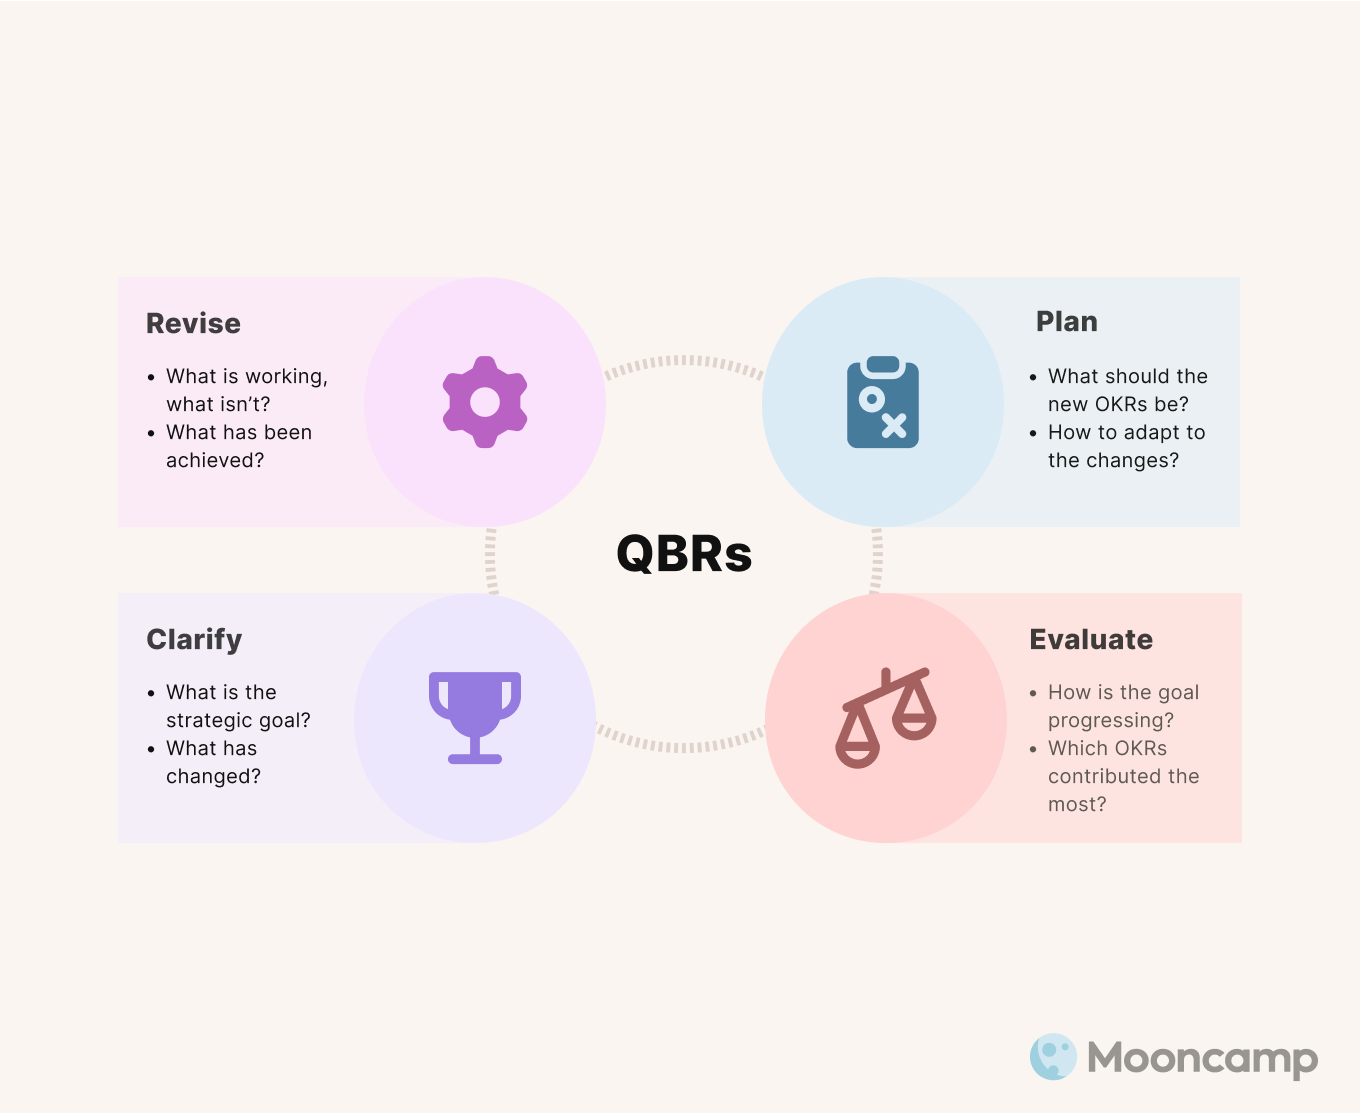 What are QBRs?